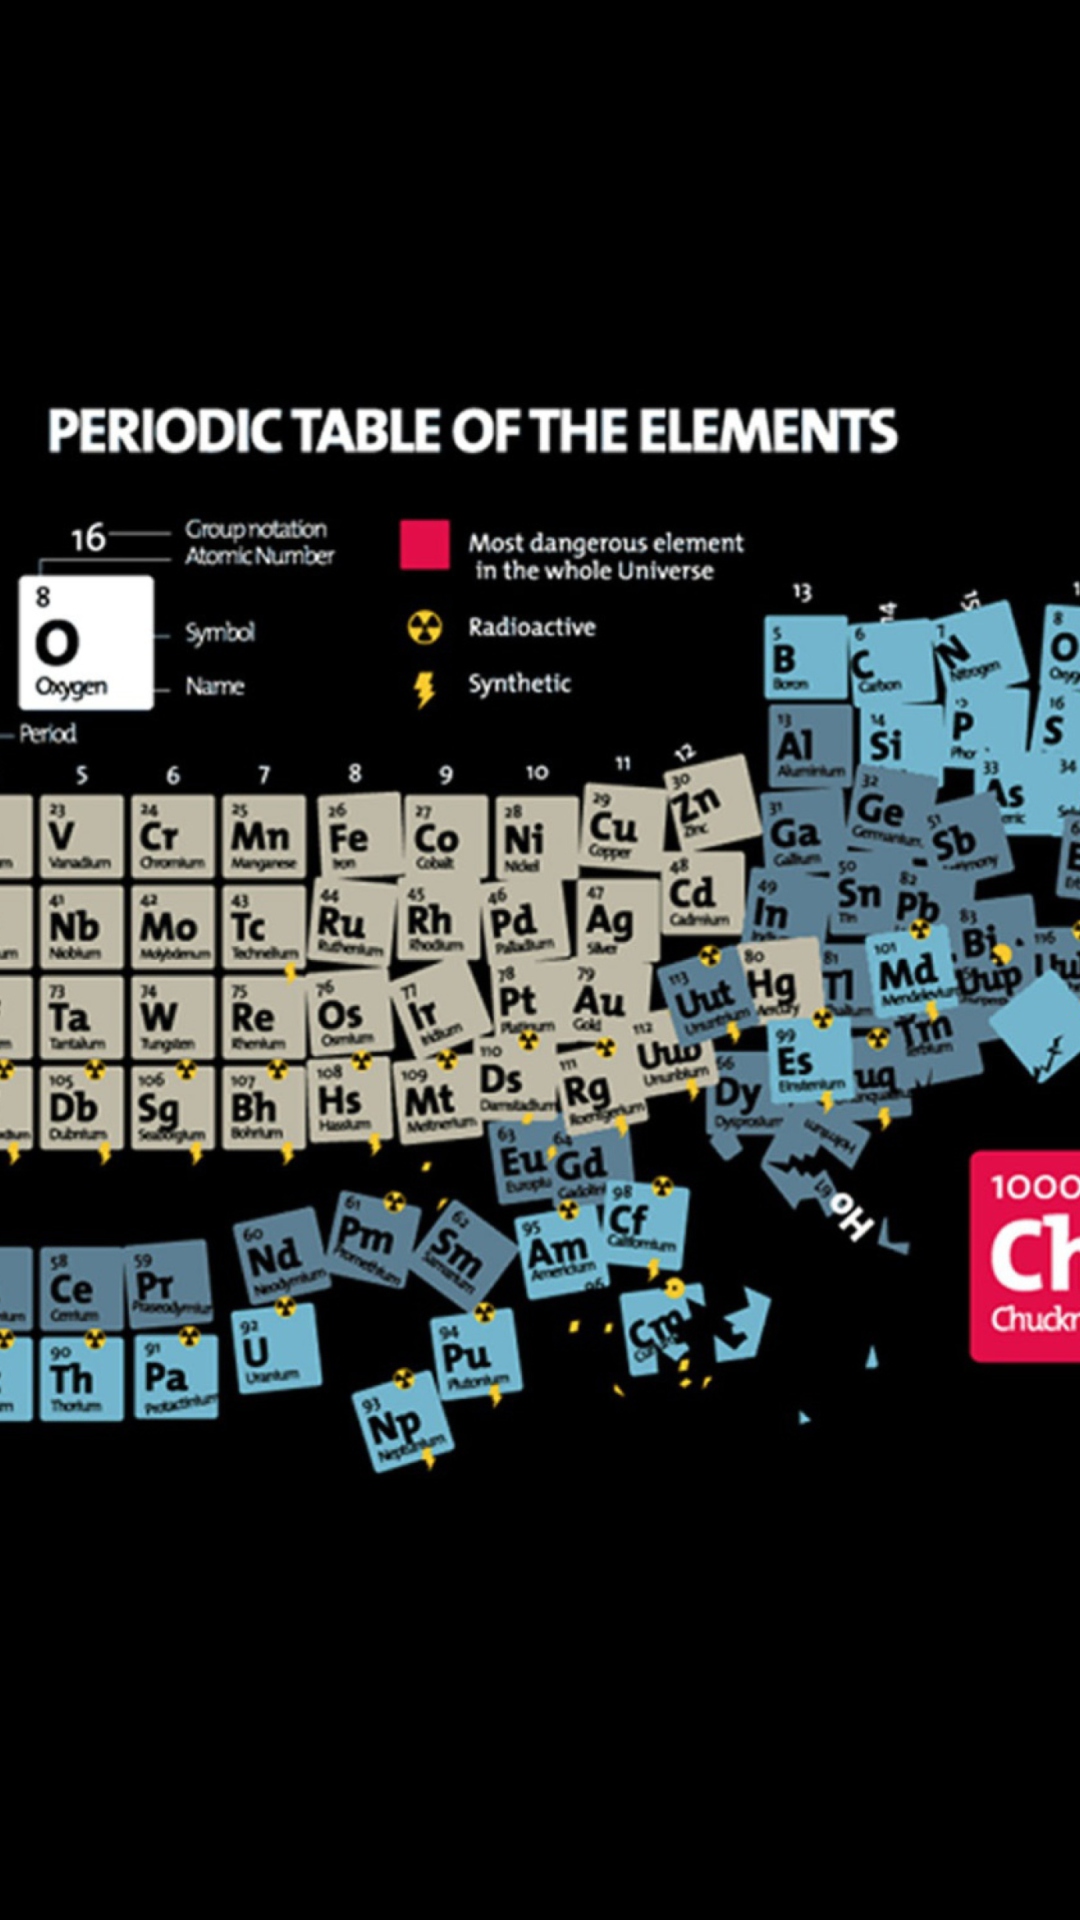 Periodic Table Of Chemical Elements screenshot #1 1080x1920